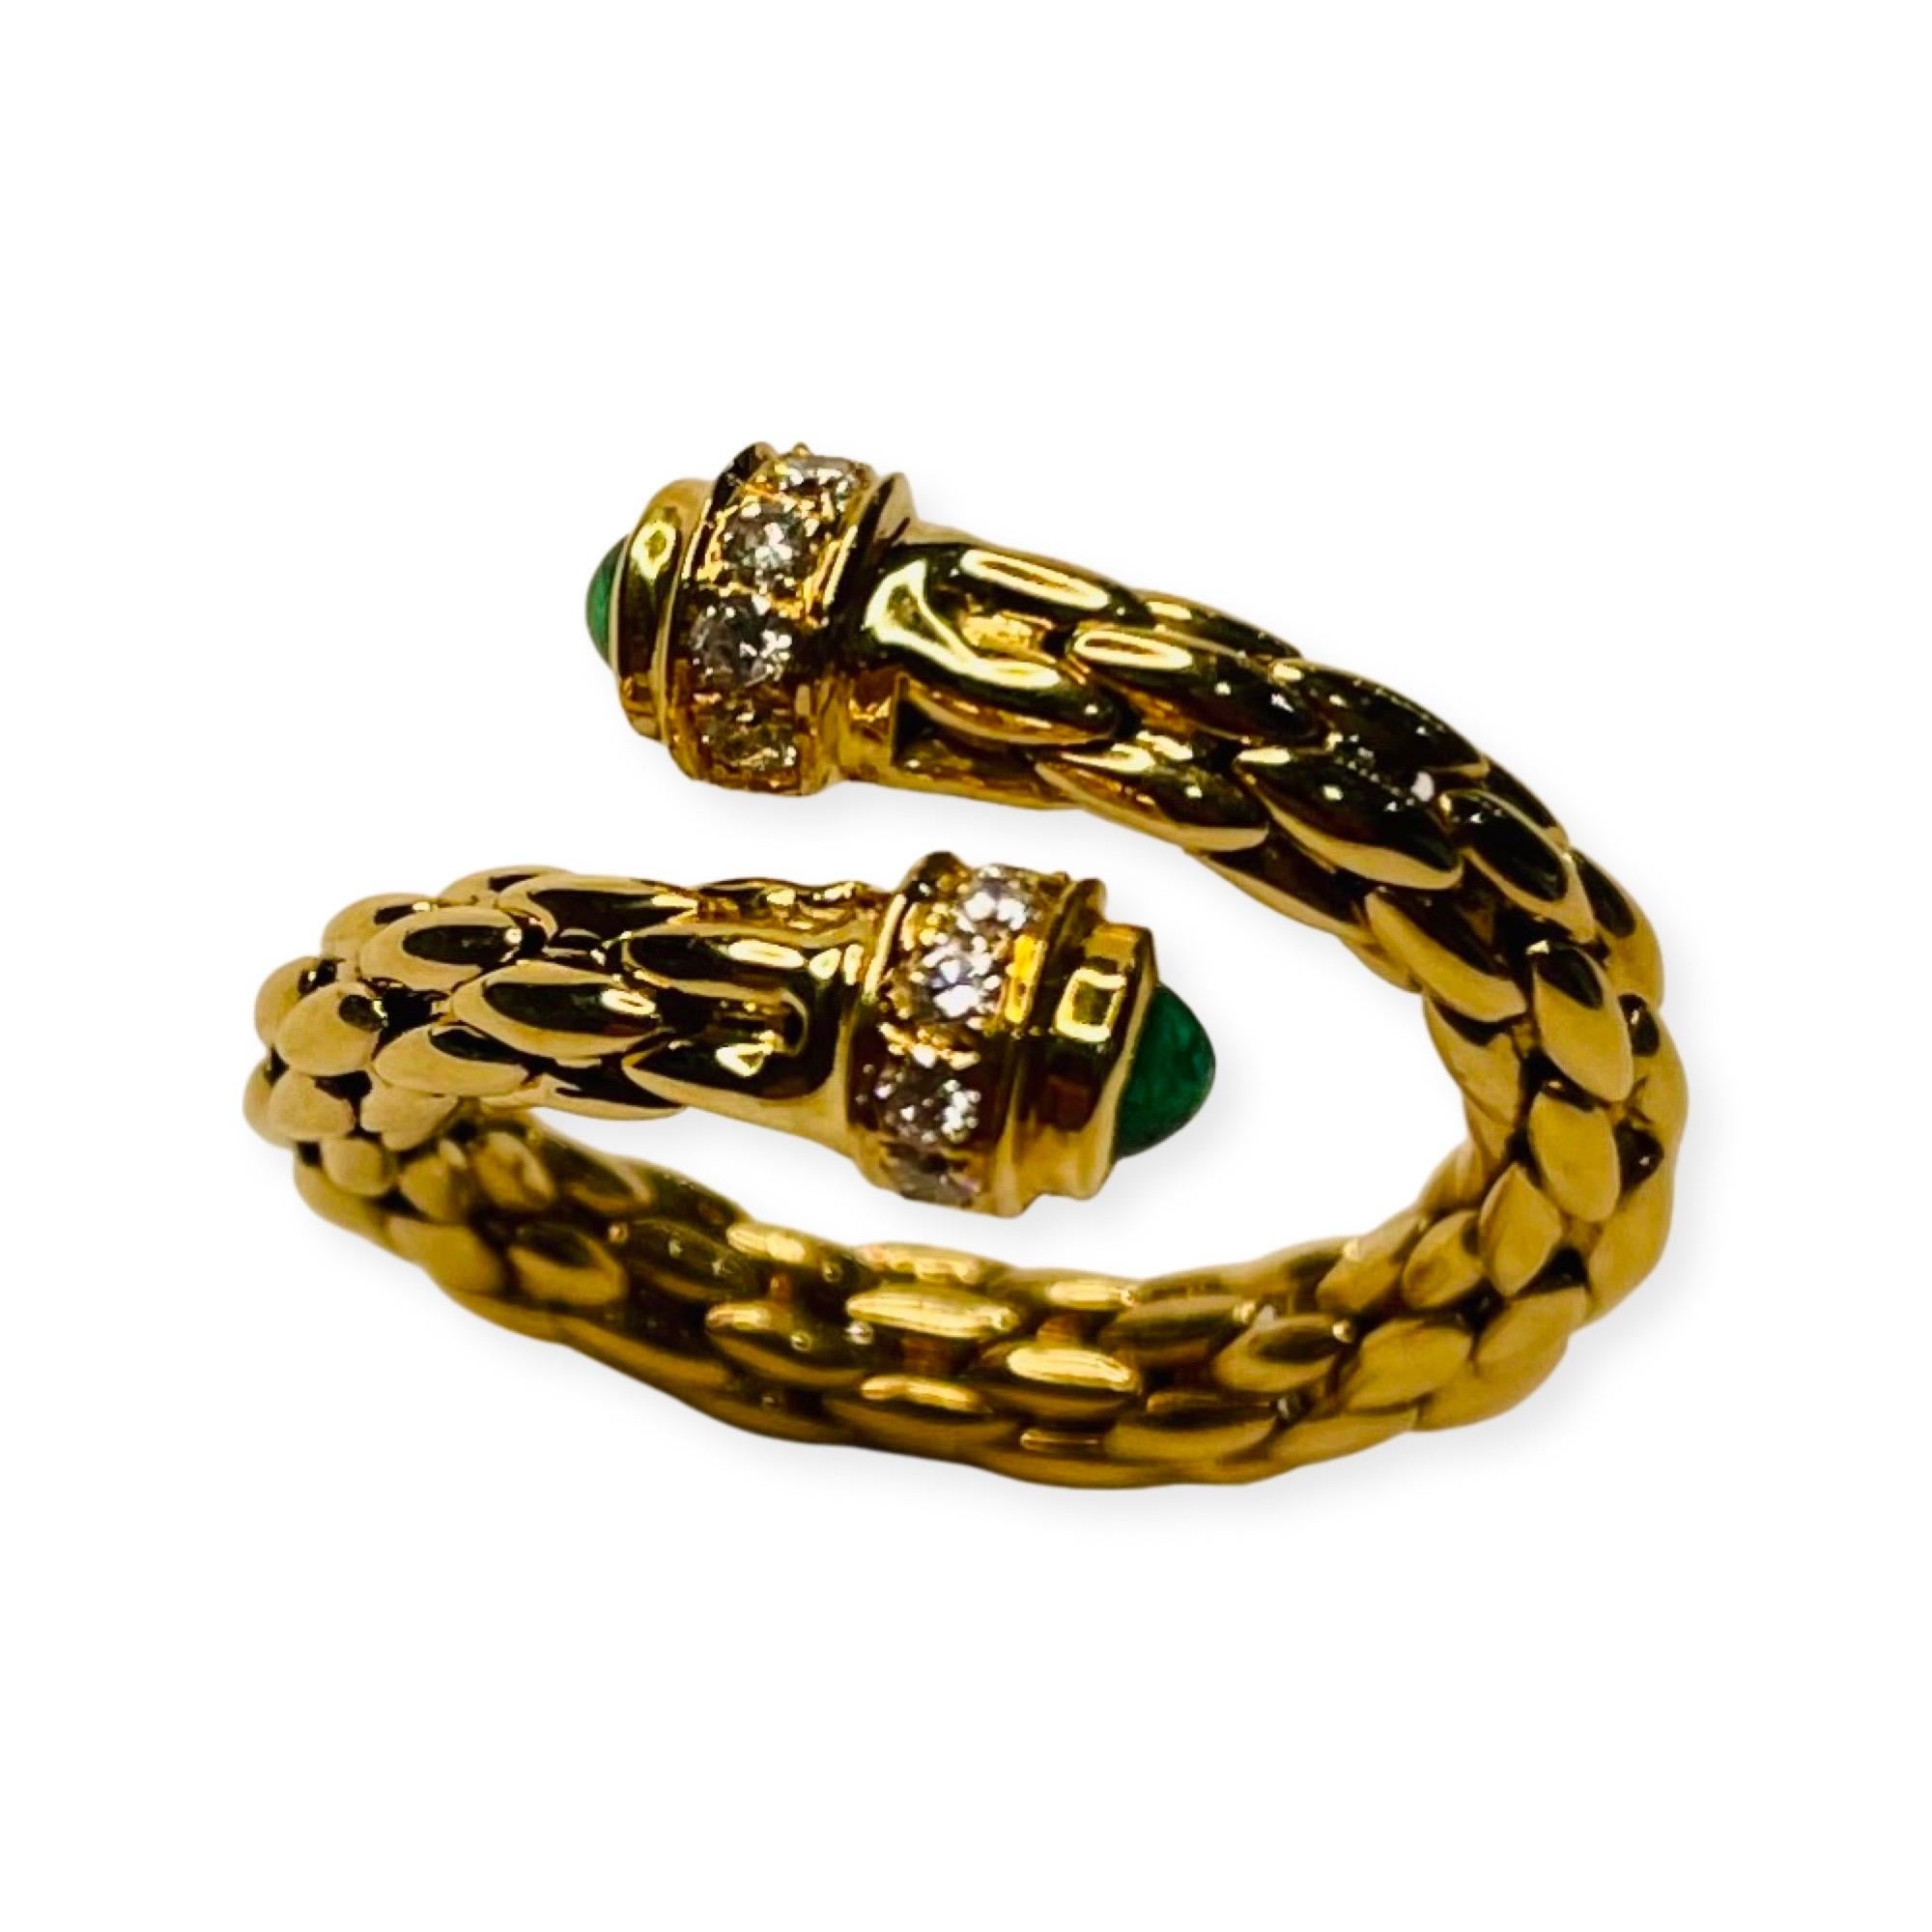 Bogo 18K Yellow Gold Emerald and Diamond Ring. This ring is a fabricated 3.9 mm wide flex band made with interlocking links. It is a bypass design. There is a 2.5 mm natural emerald cabochon, bezel set, in ends of the ring. There are 5 full cut